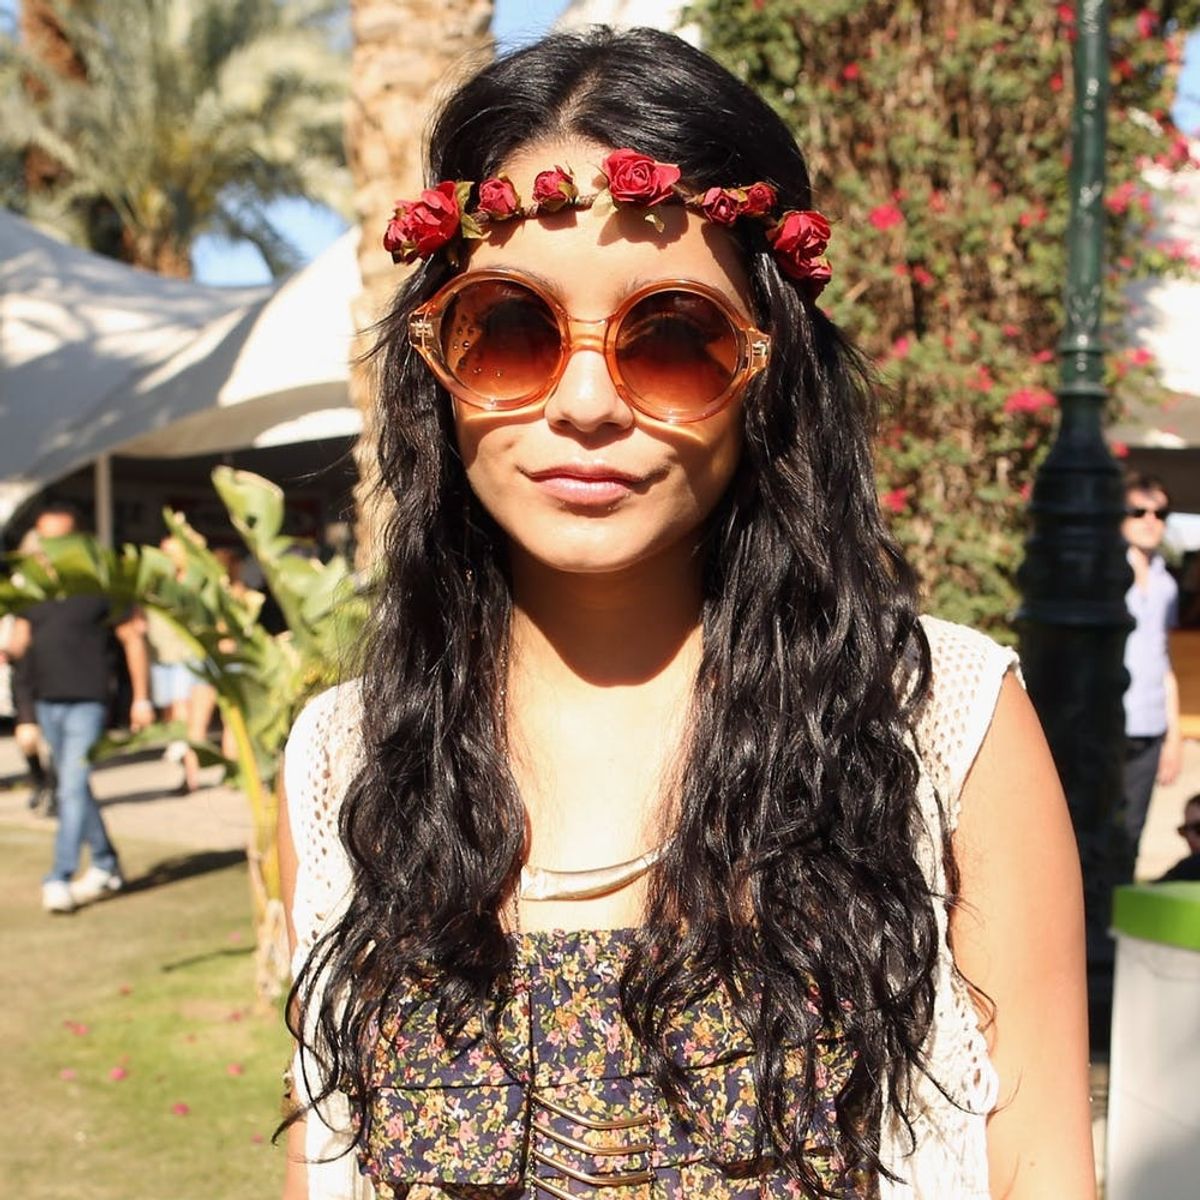 See How Your Fave Celebs Are Getting Coachella Started Right